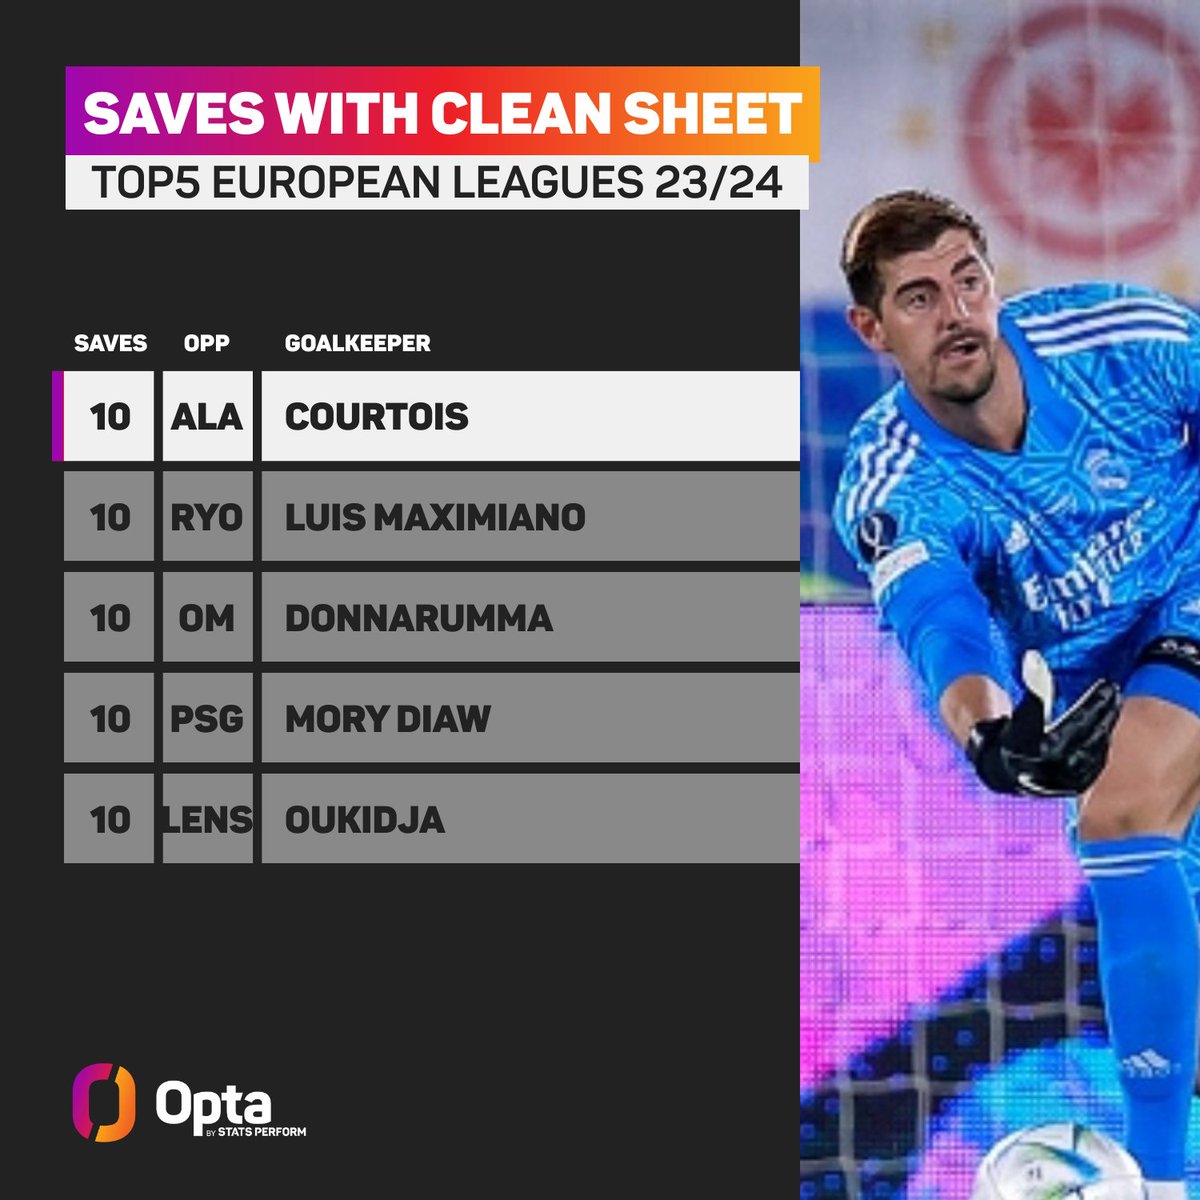 📊 Real Madrid's Thibaut Courtois made 10 saves to keep a clean sheet against Alavés, equalling the highest tally for a goalkeeper saves in a match while keeping a clean sheet in the Top-5 European Leagues this season.

Fénix.

#FansRMCF